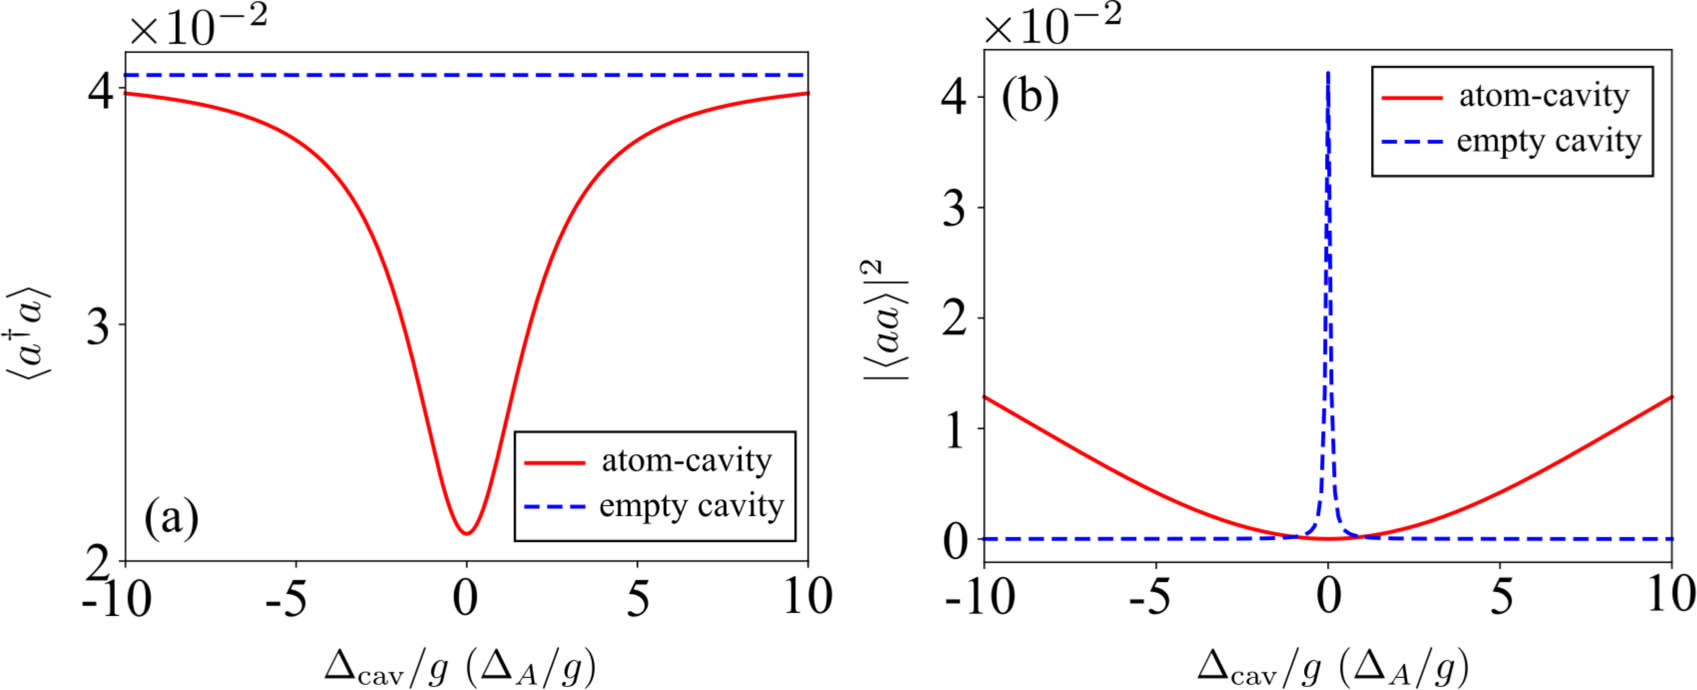 Panels (a) and (b) show the cavity excitation spectrum, i.e., the mean photon number 〈a†a〉, and the quantum fluctuation of cavity photons |〈aa〉|2 with r=0.2. For the empty cavity (blue dashed curves), the cavity mode frequency is fixed, and Δcav=ωcav−ωsq. In the presence of the atom (red solid curves), we assume ωcav=ωsq and ΔA=Δcav=ωA−ωsq. The system parameters are given by g/κ=15 and γ/κ=1.